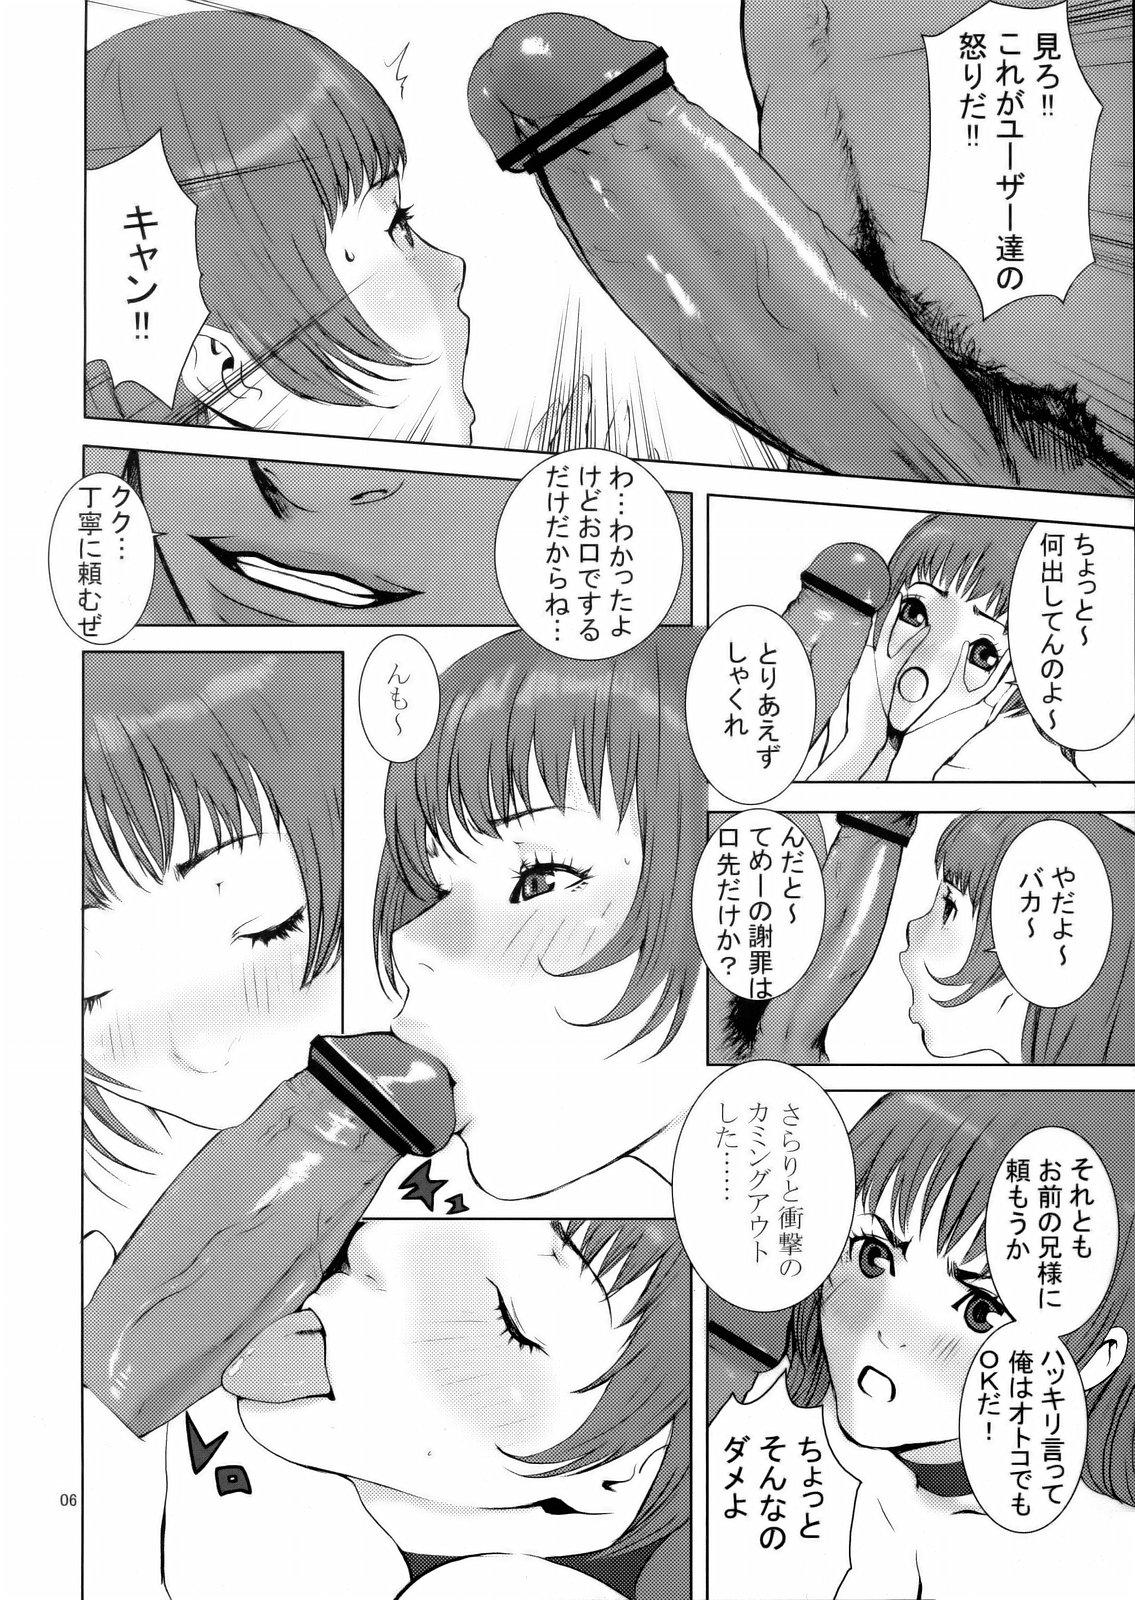 Best Blowjobs Ever KASUMI CHANCO 360 - Dead or alive Con - Page 5